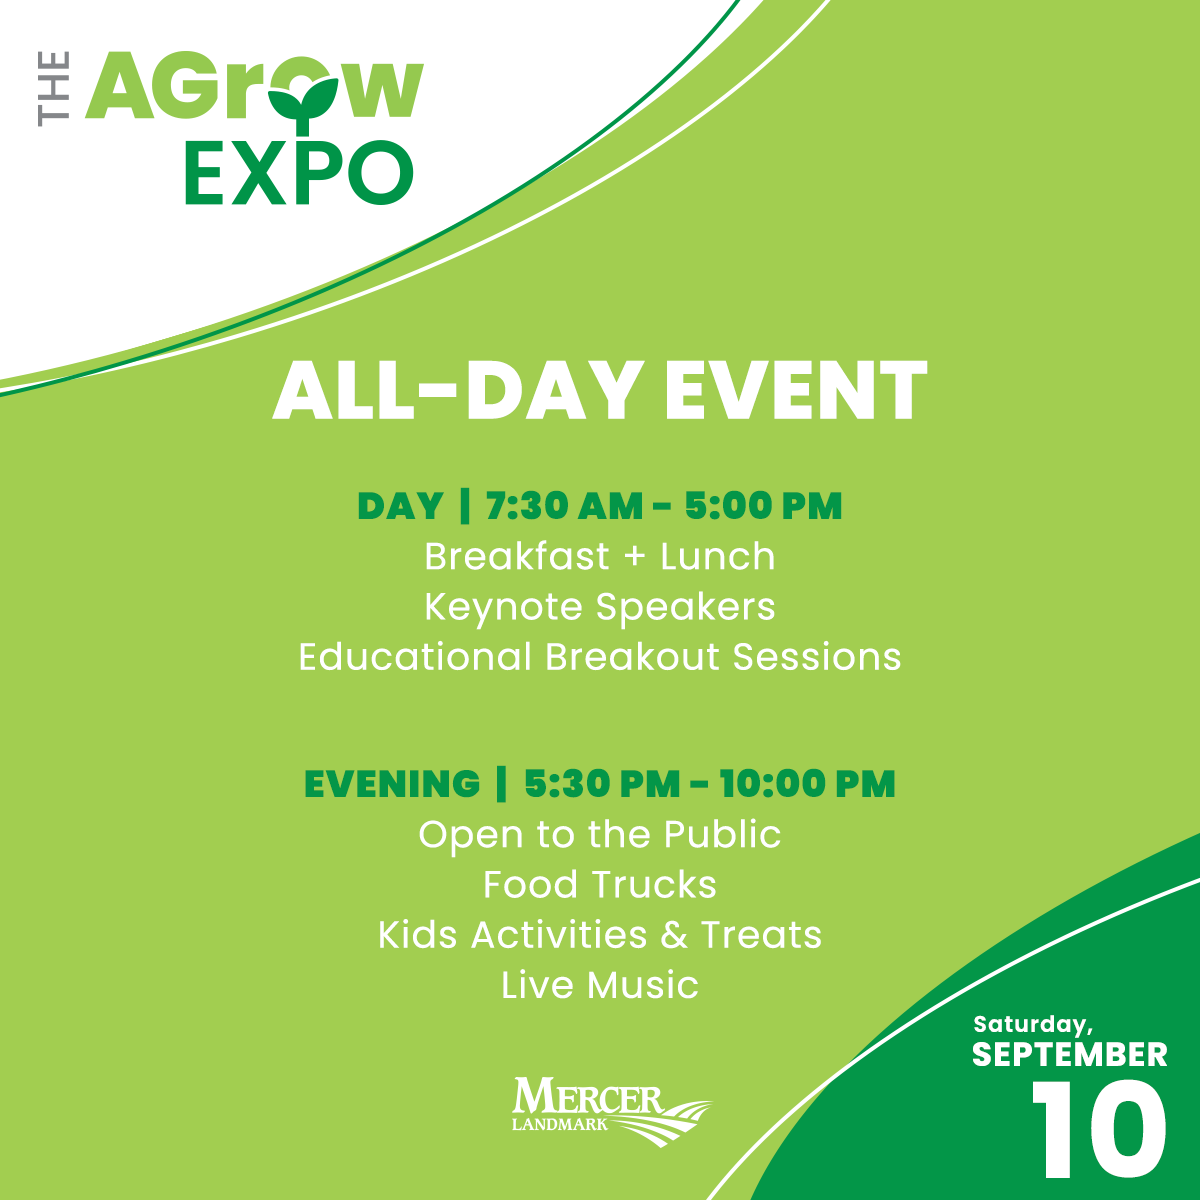 Agrow Expo schedule